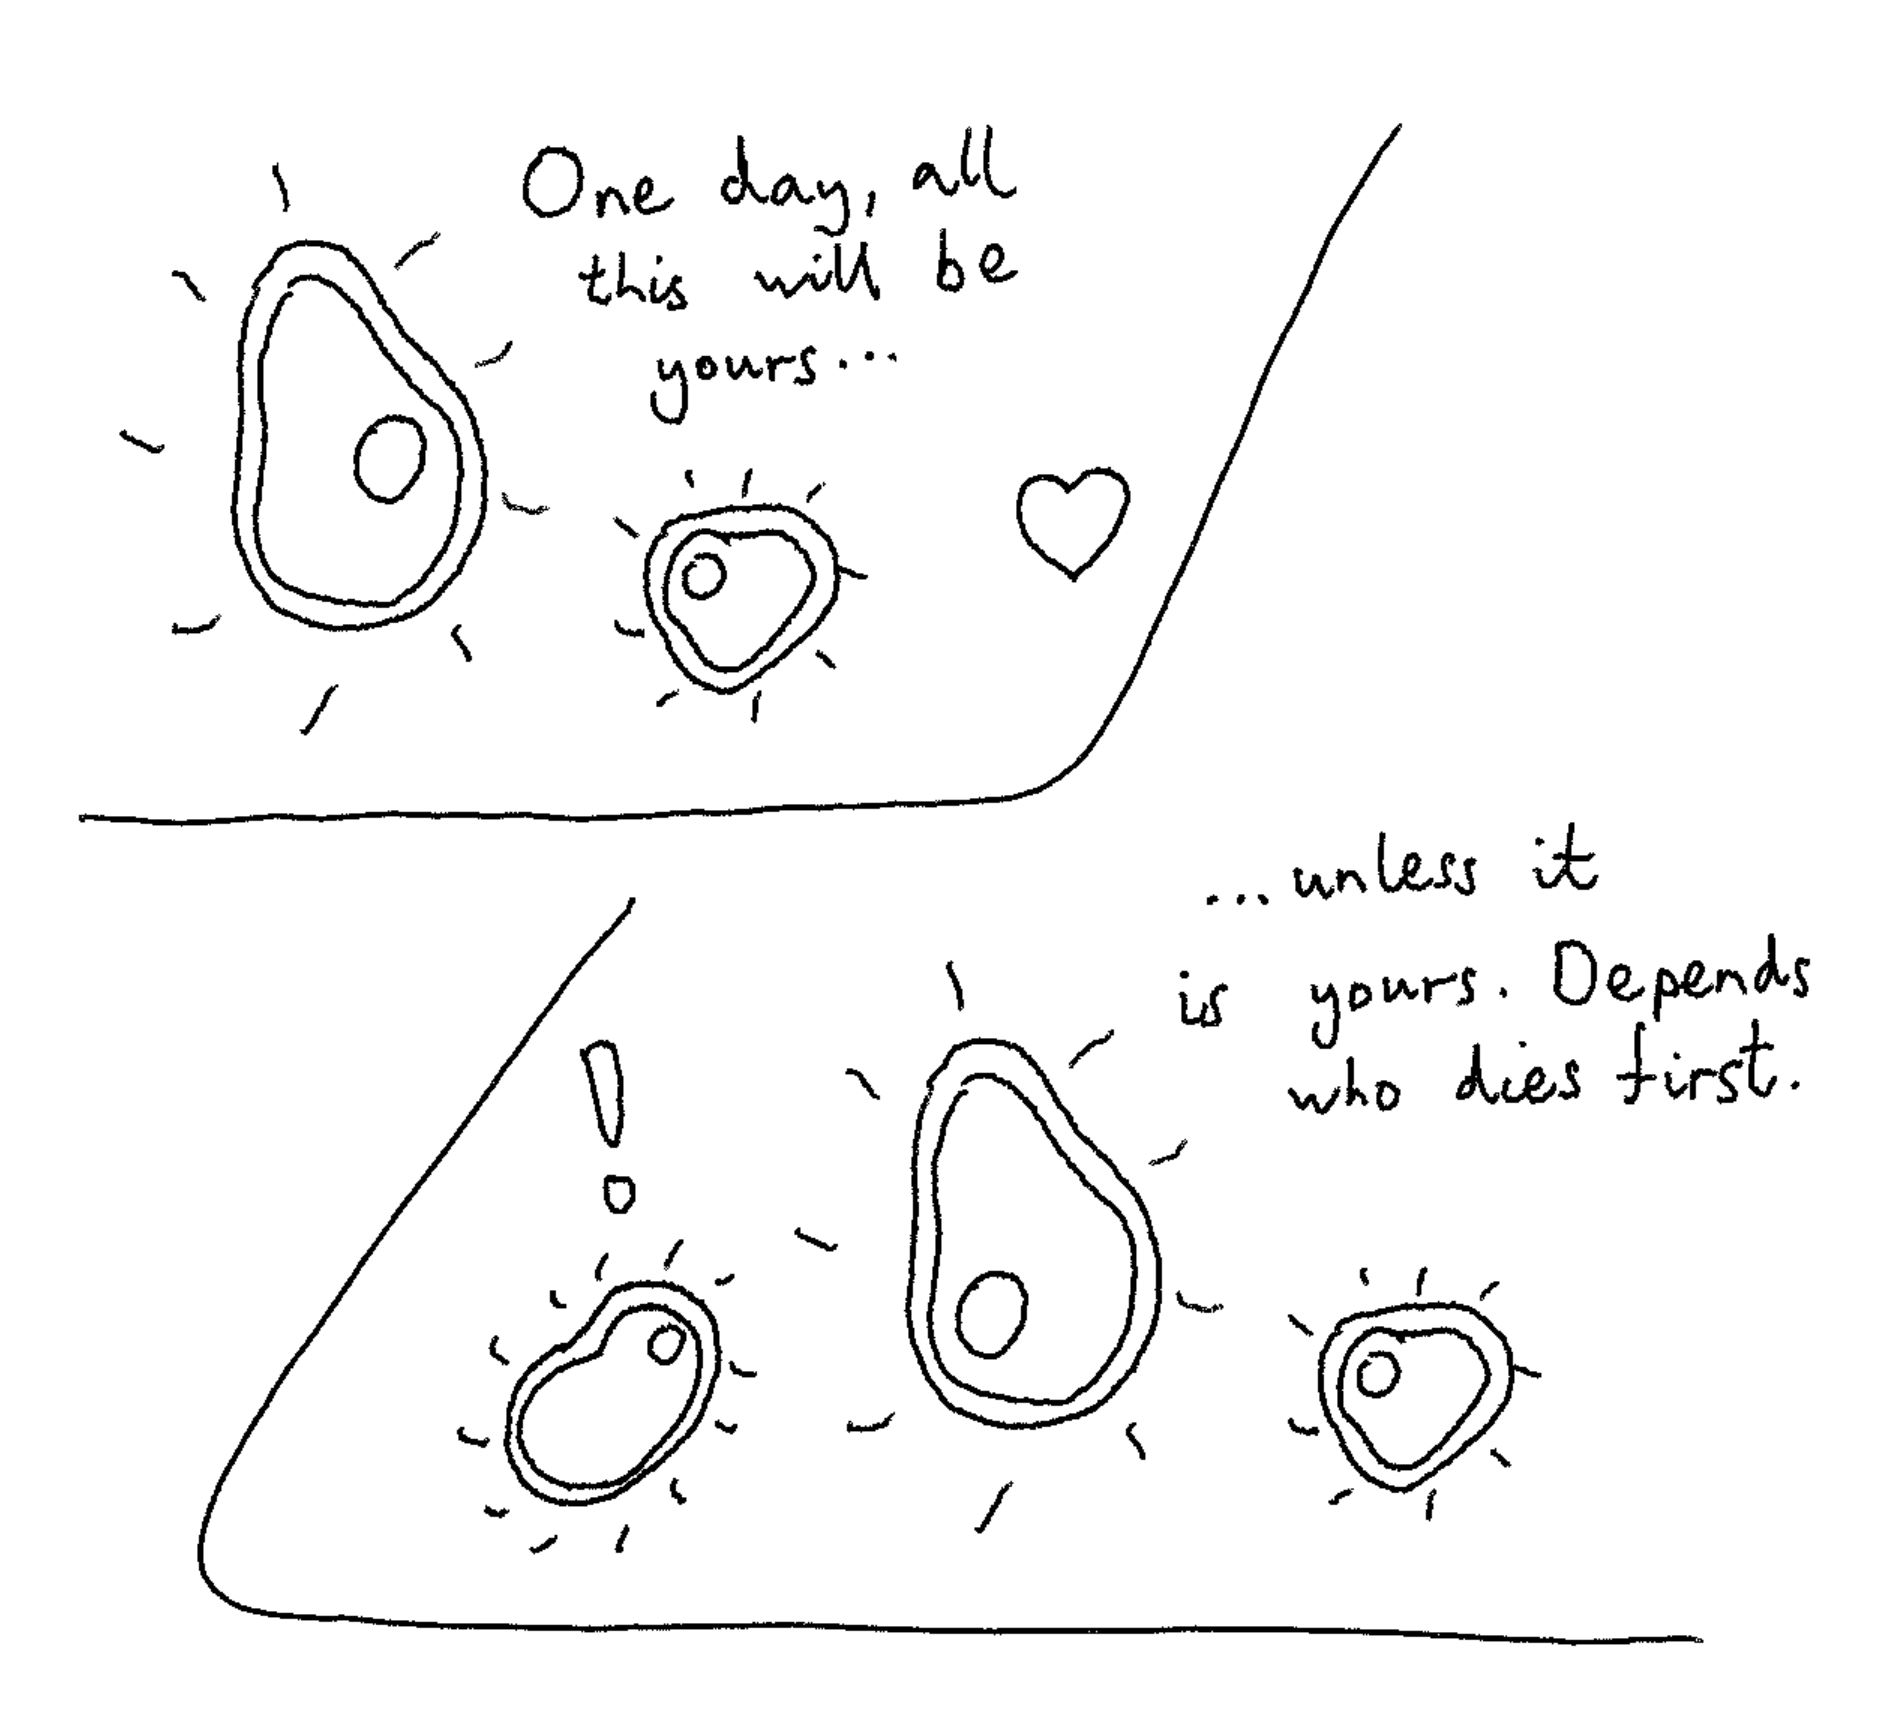  Only one: an amoeba looks at a smaller amoeba with love and says, 'One day all this will be yours...'. In the next panel, the same amoeba looks at a second smaller amoeba, saying, '...unless it is yours. Depends who dies first.' 